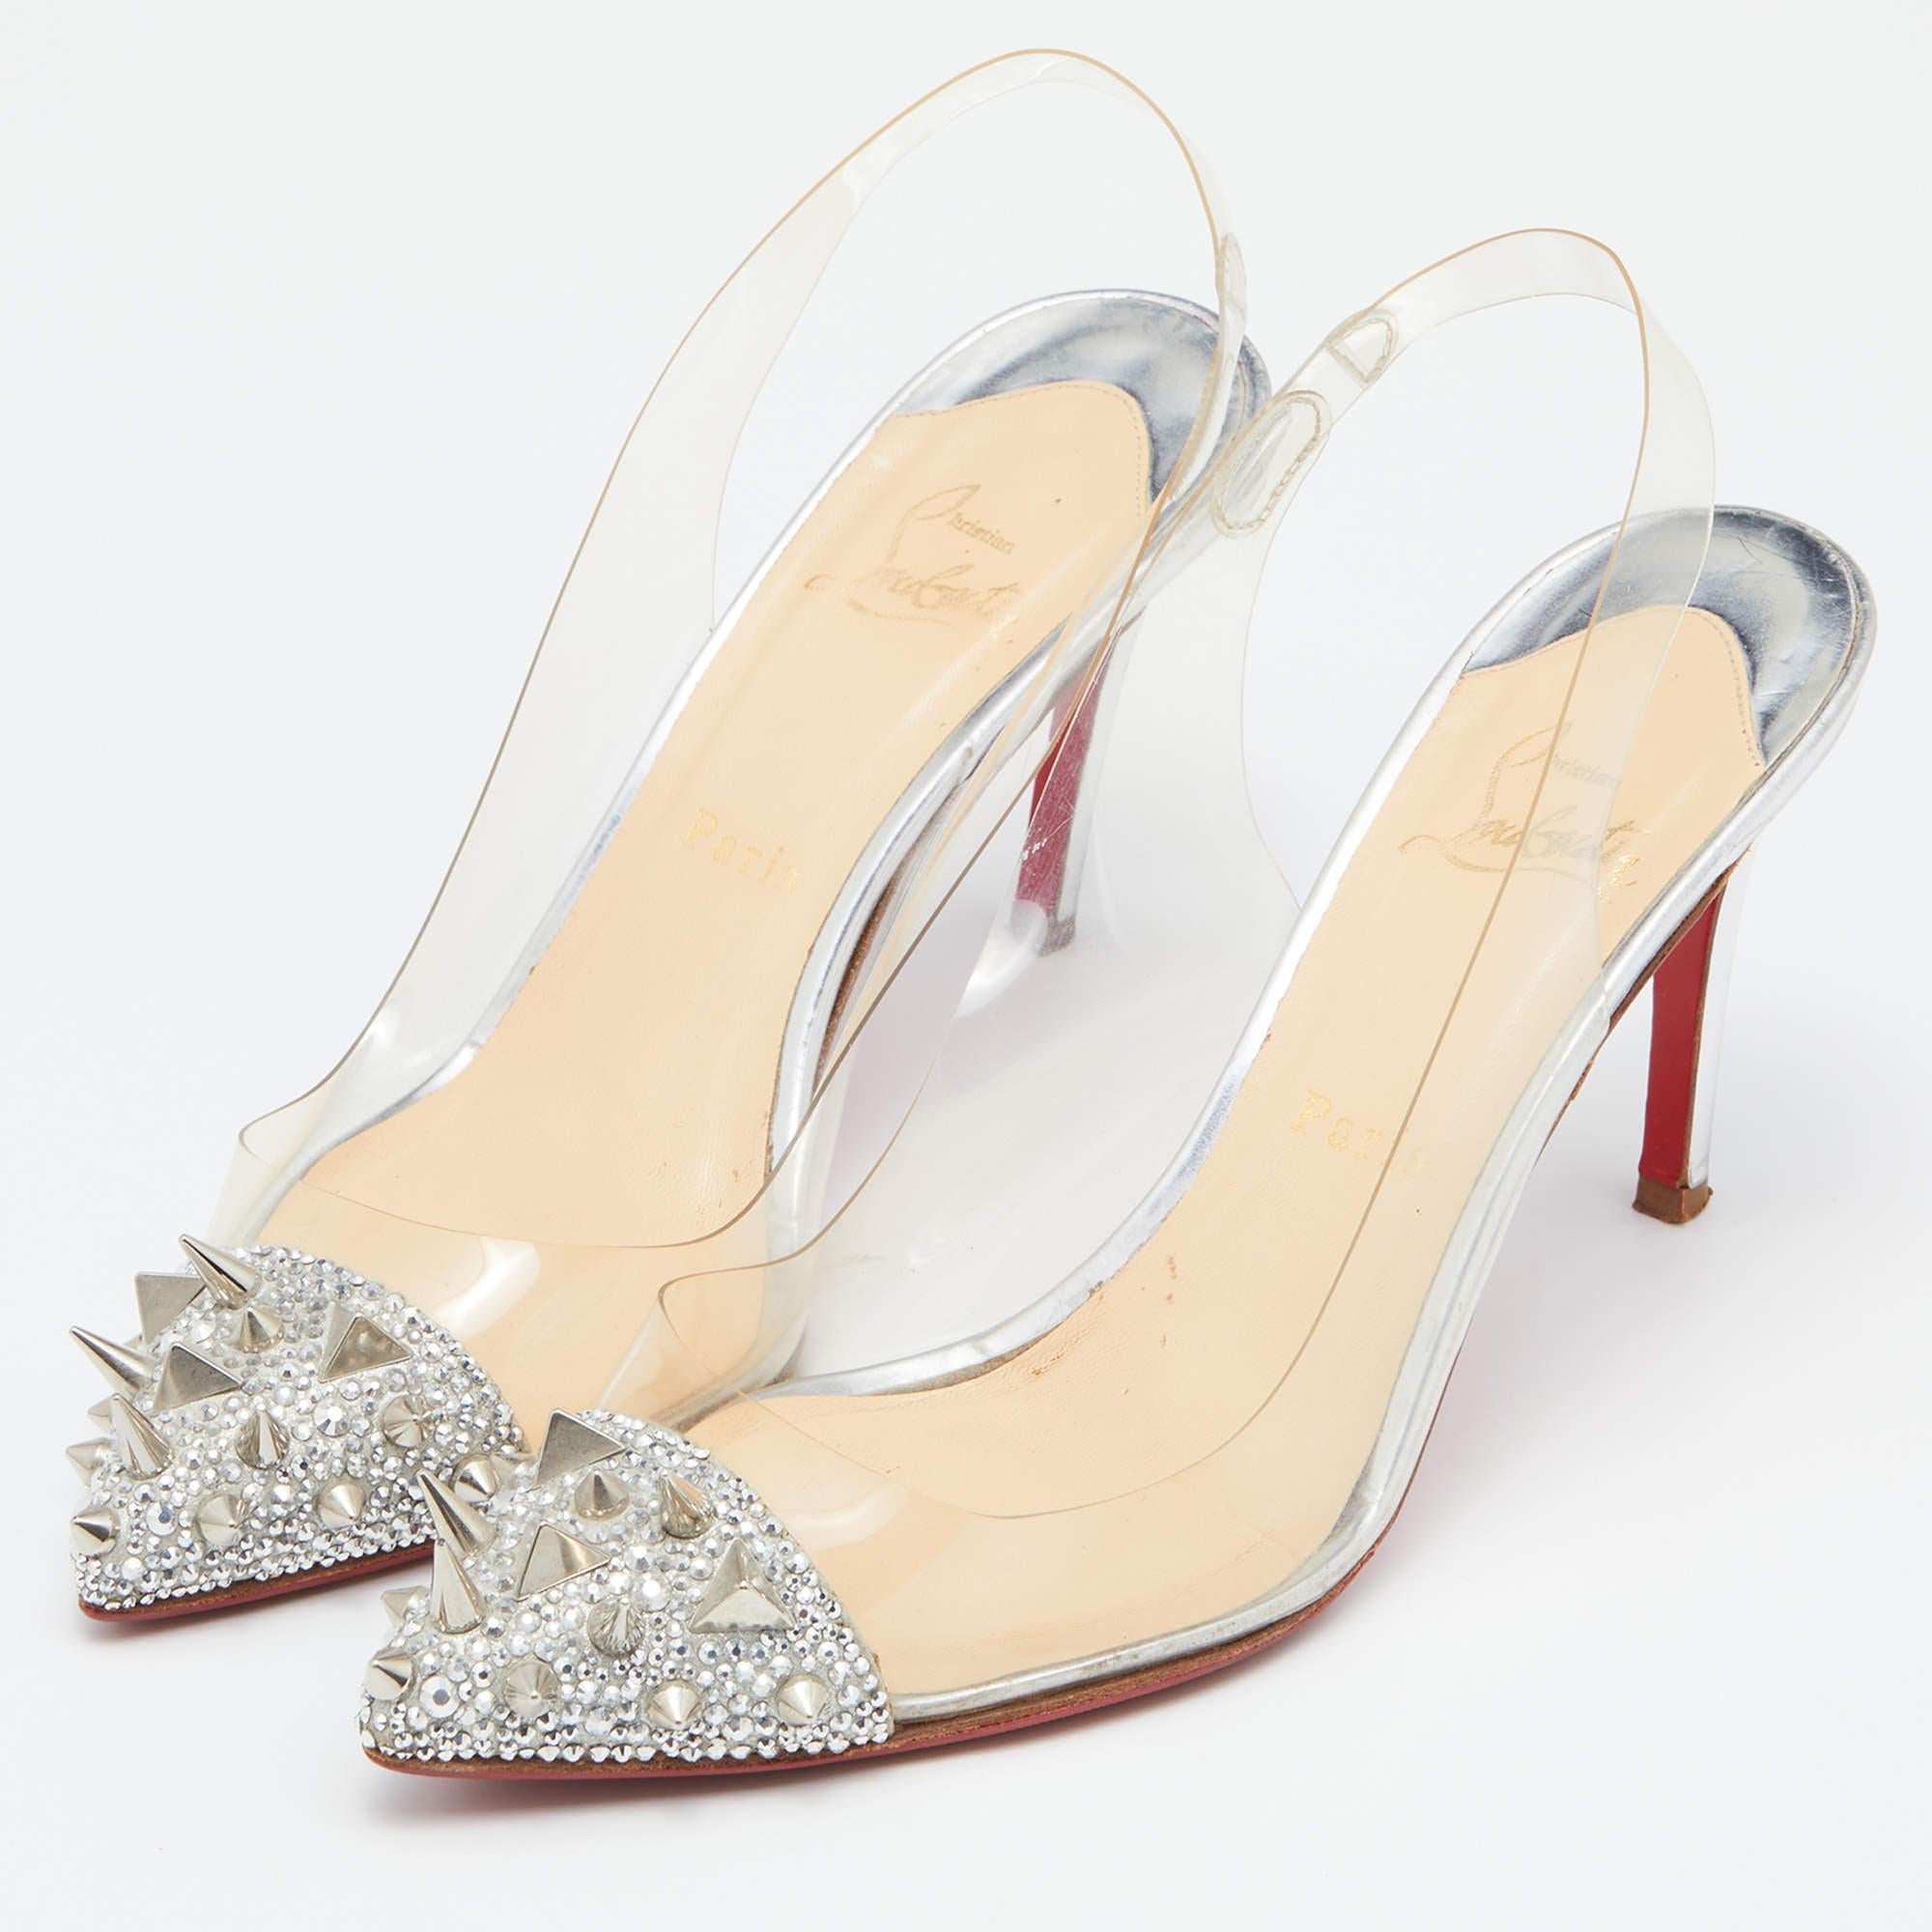 Complement your well-put-together outfit with these authentic Christian Louboutin Just Picks pumps. Timeless and classy, they have an amazing construction for enduring quality and comfortable fit.

